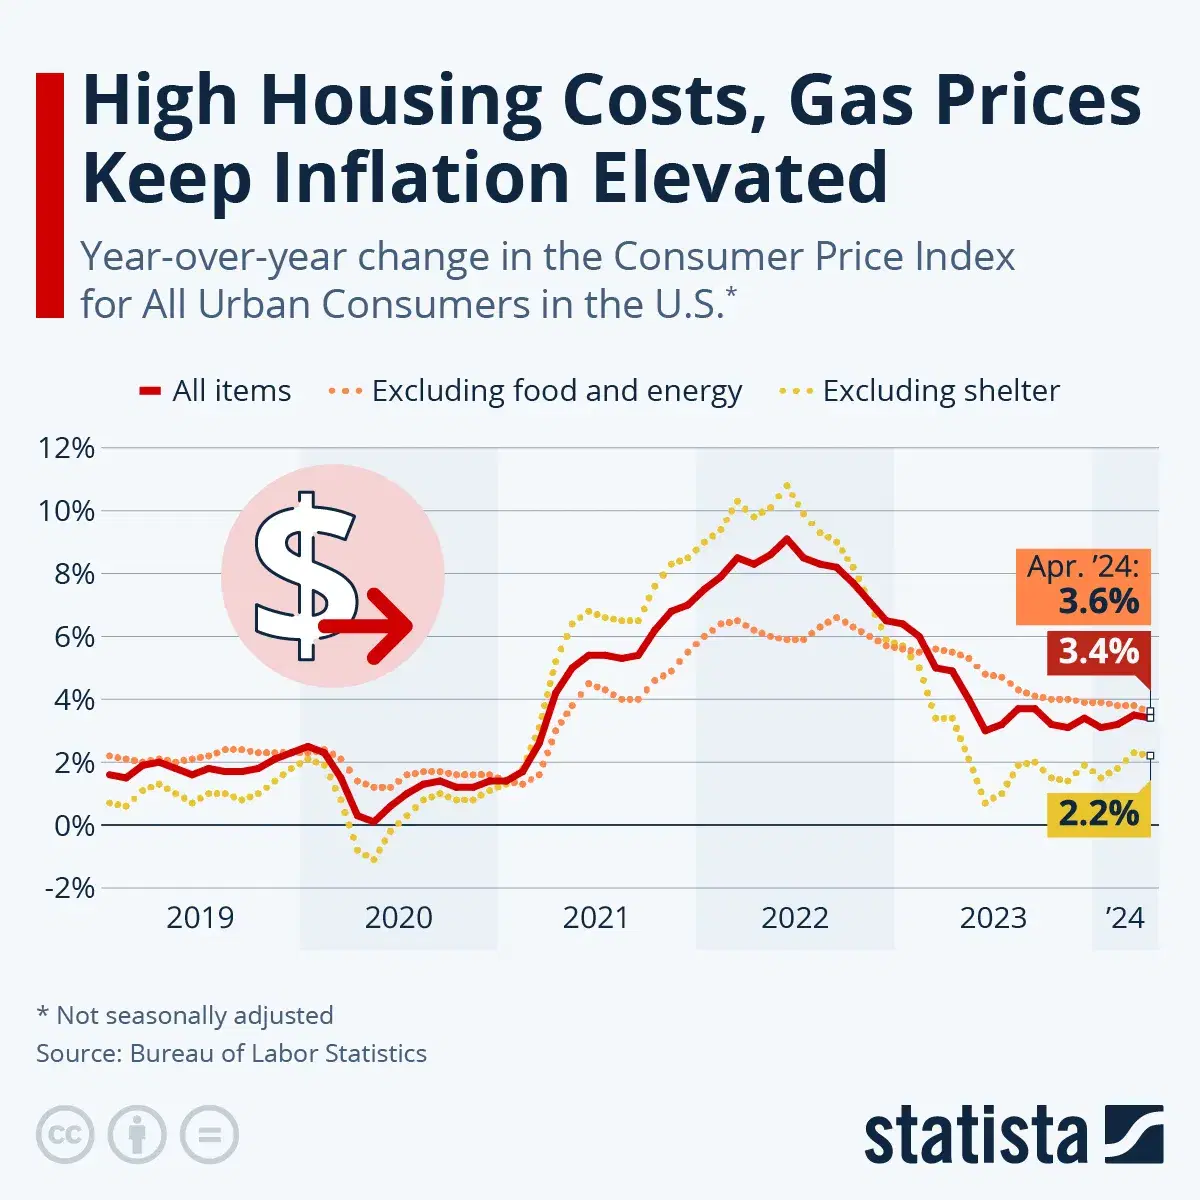 High Housing Costs, Gas Prices Keep Inflation Elevated